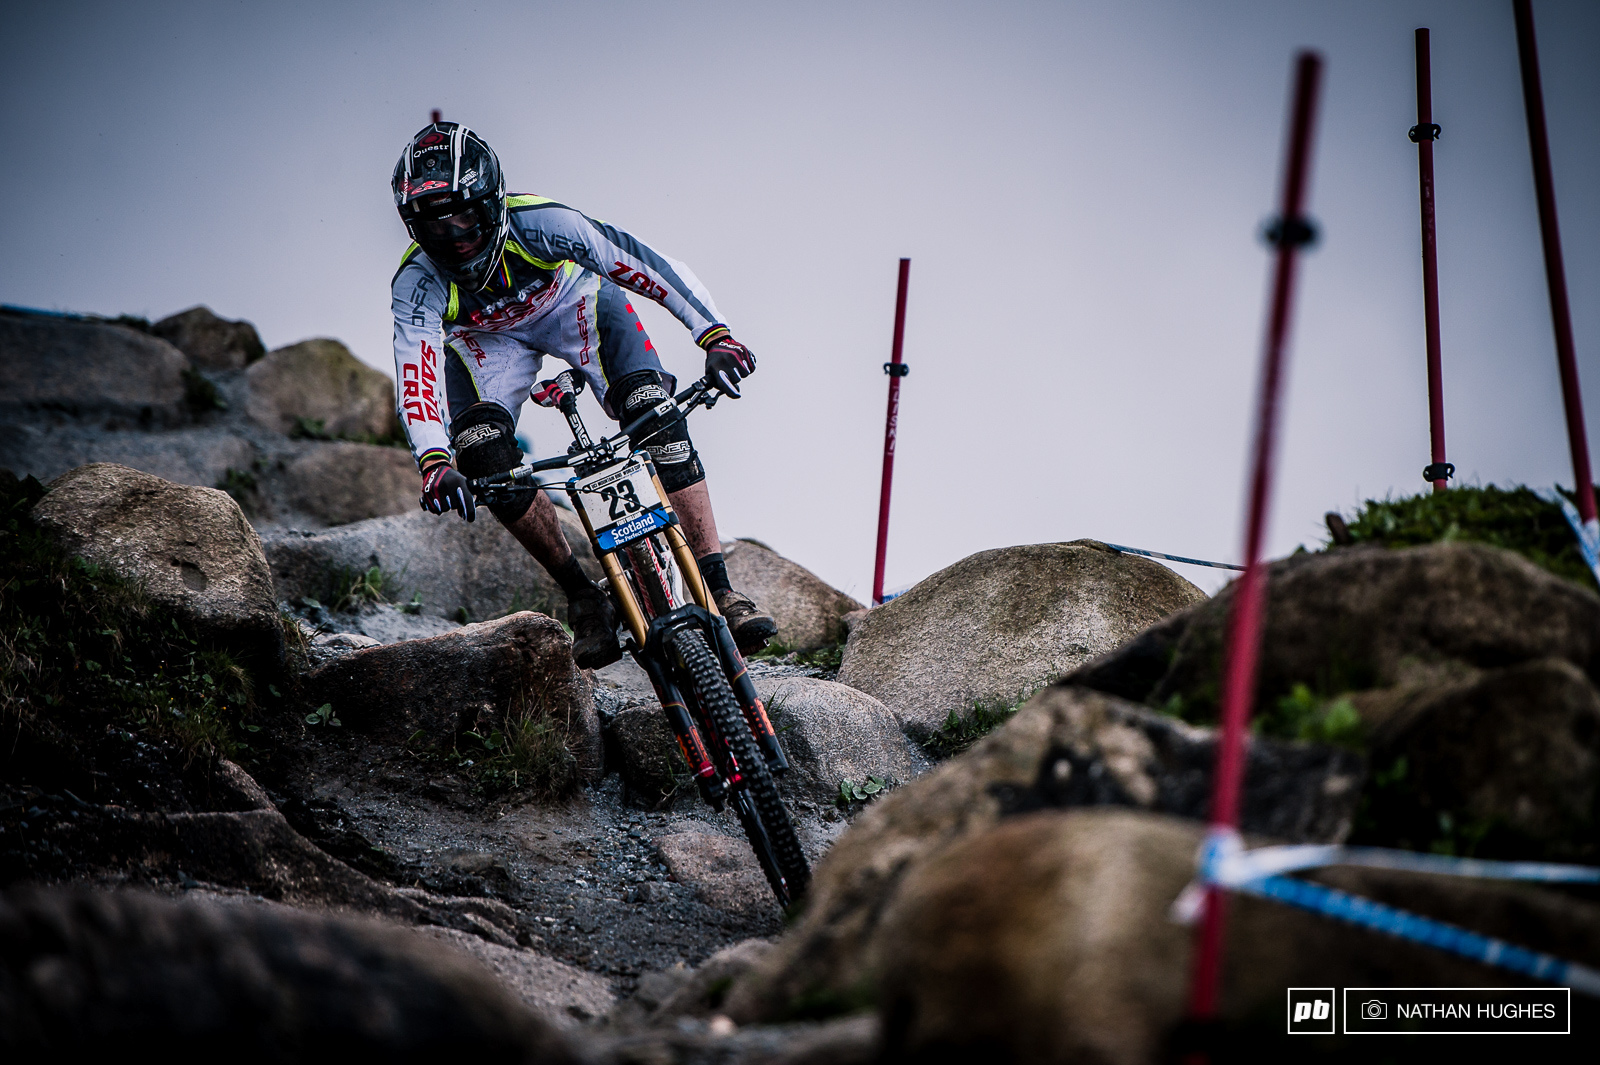 Minnaar denies flying under the radar this weekend but he surely did less laps than most. After 22nd with a thumb fresh from surgery in Lourdes a clean bill of health was all he needed to take his 5th Fort William victory.